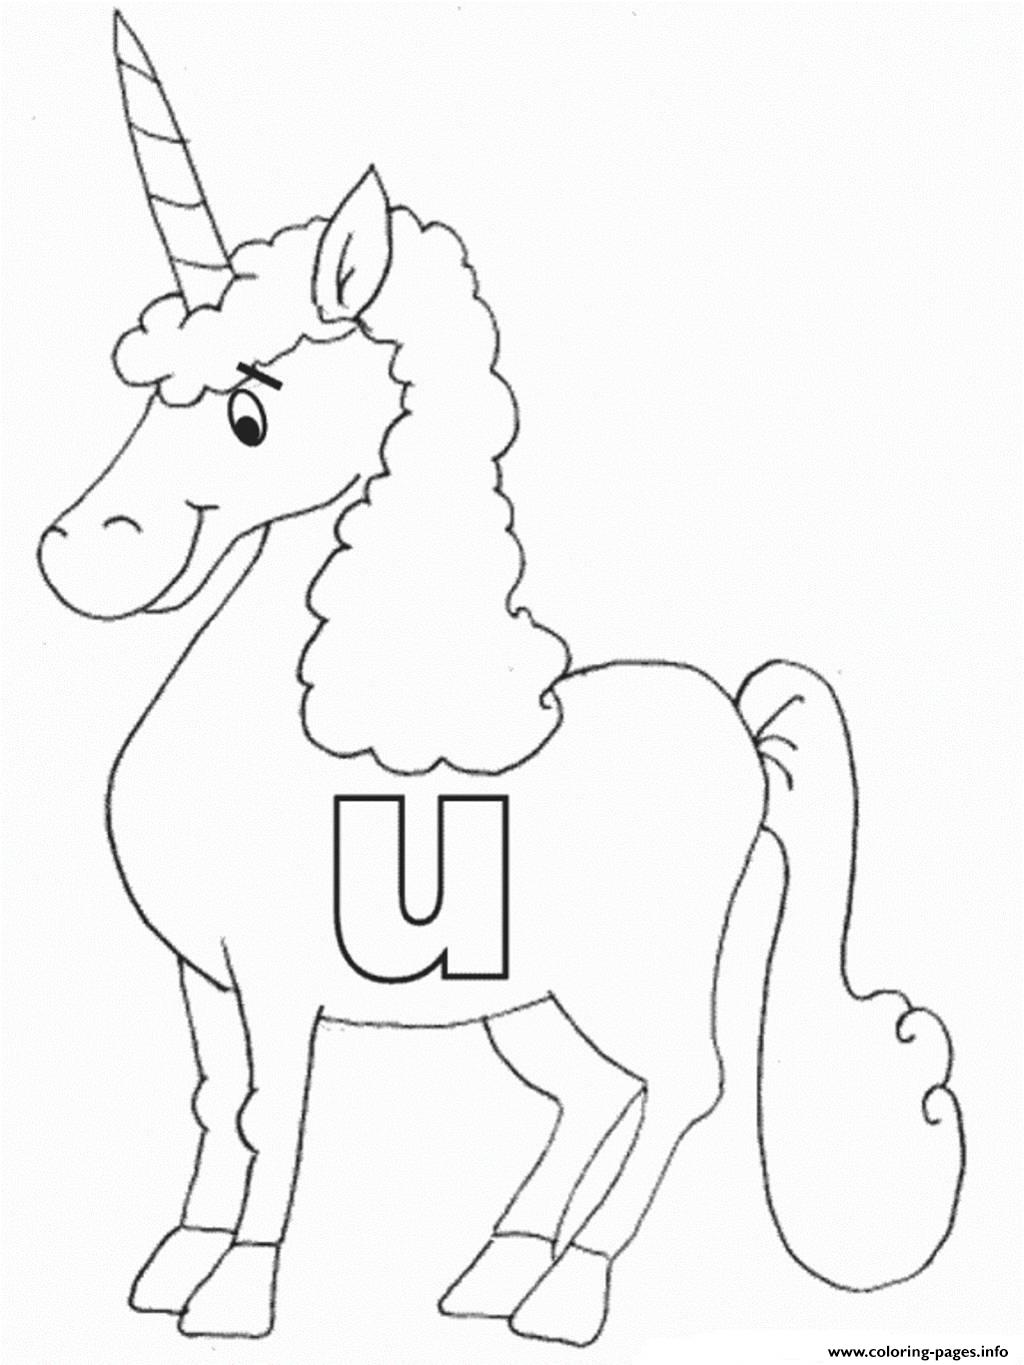 Lowercase U In Unicorn Alphabet S Freebb4e Coloring Pages ...